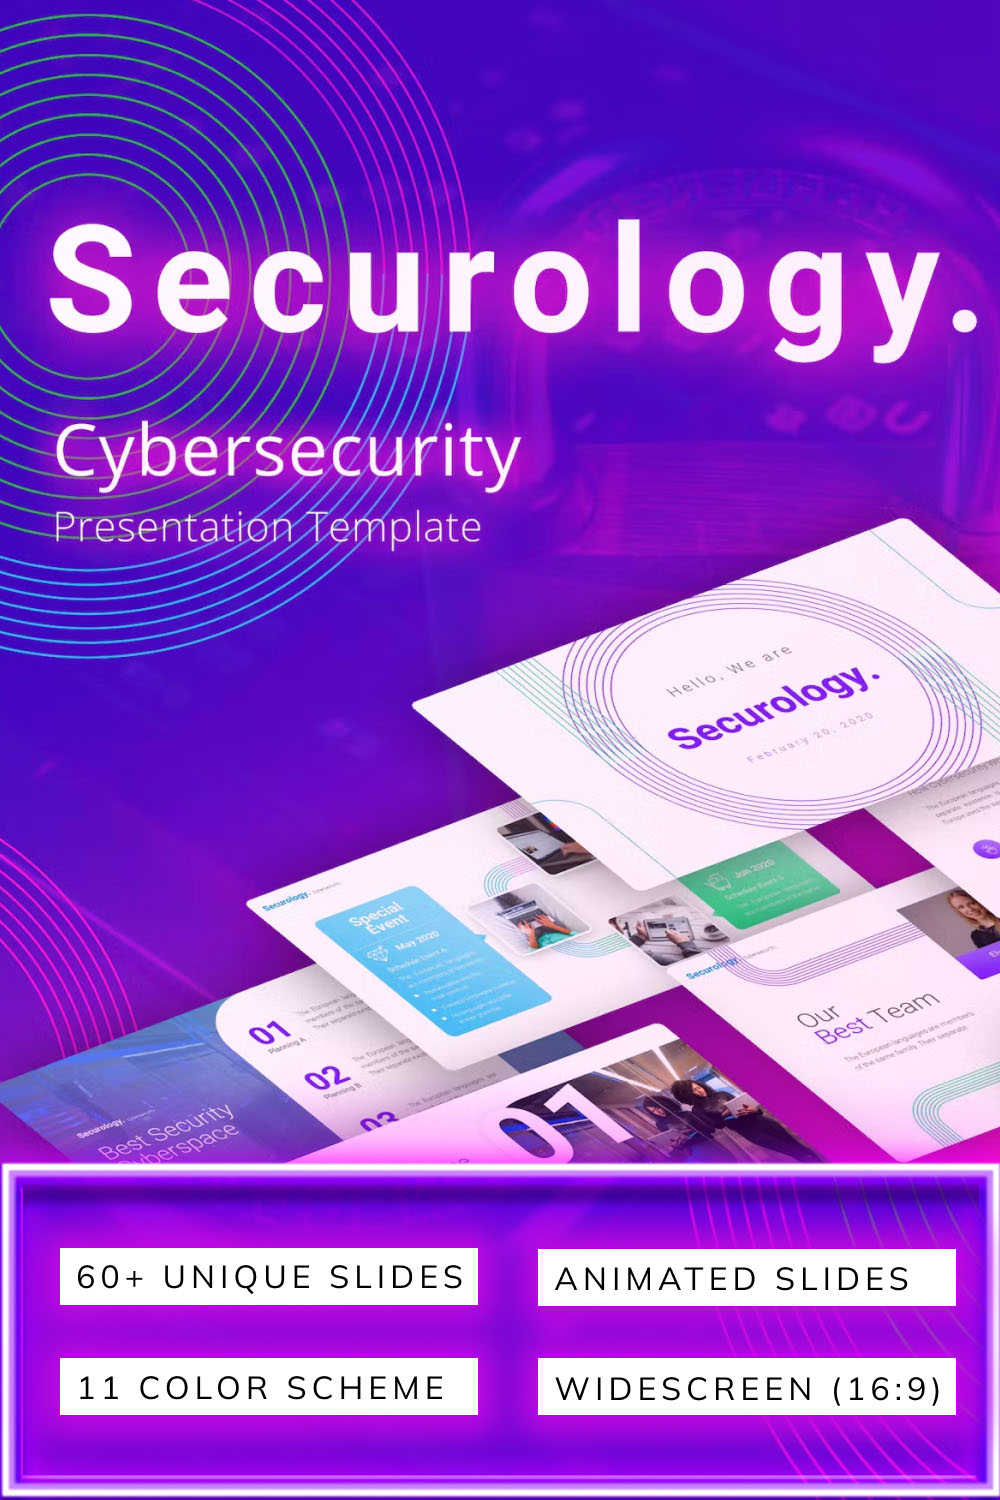 Securology cybersecurity powerpoint template of pinterest.